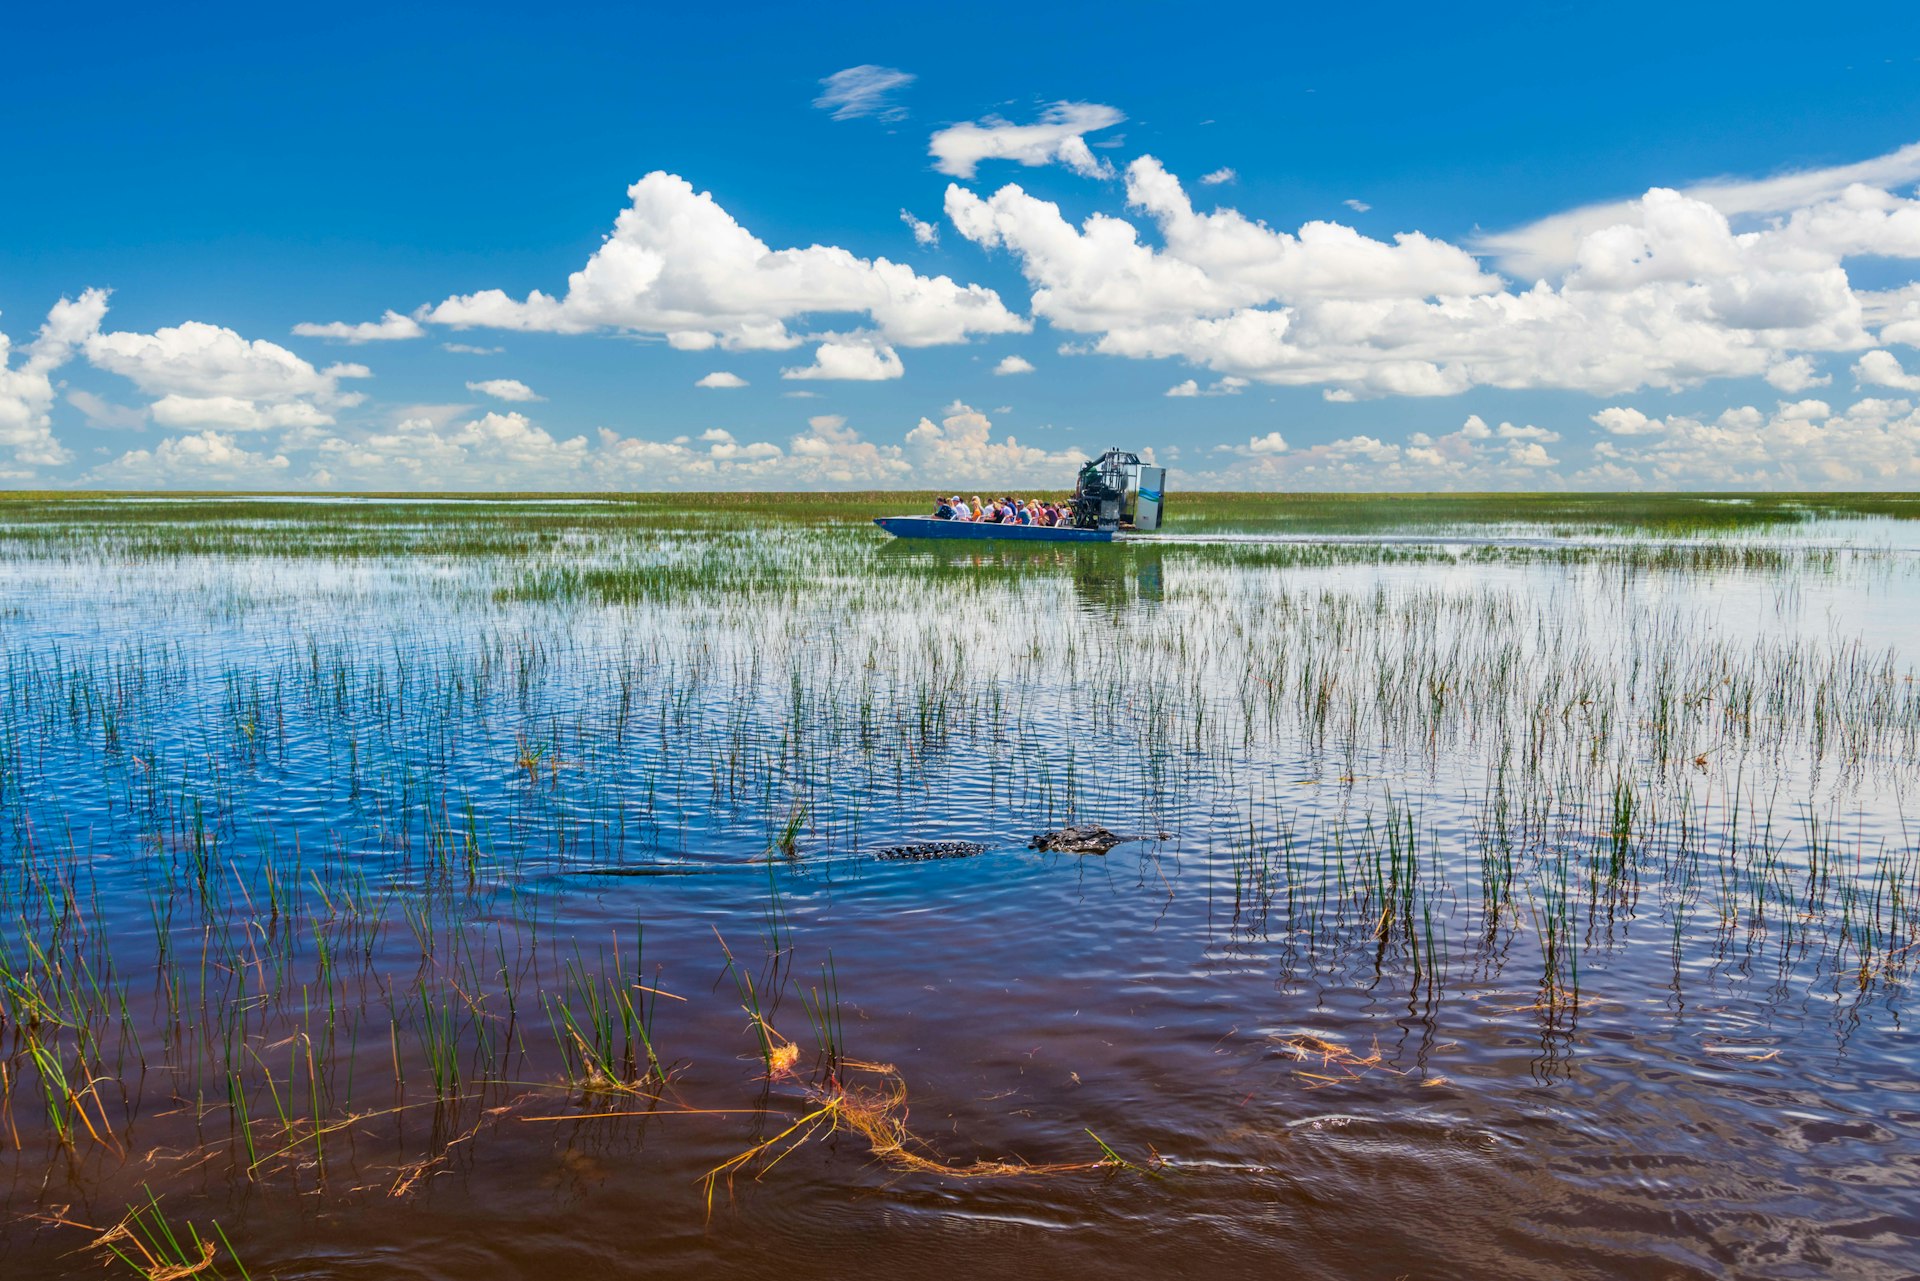 Blue skies are reflected in the still waters of the Everglades with tourists on an airboat seen in the distance